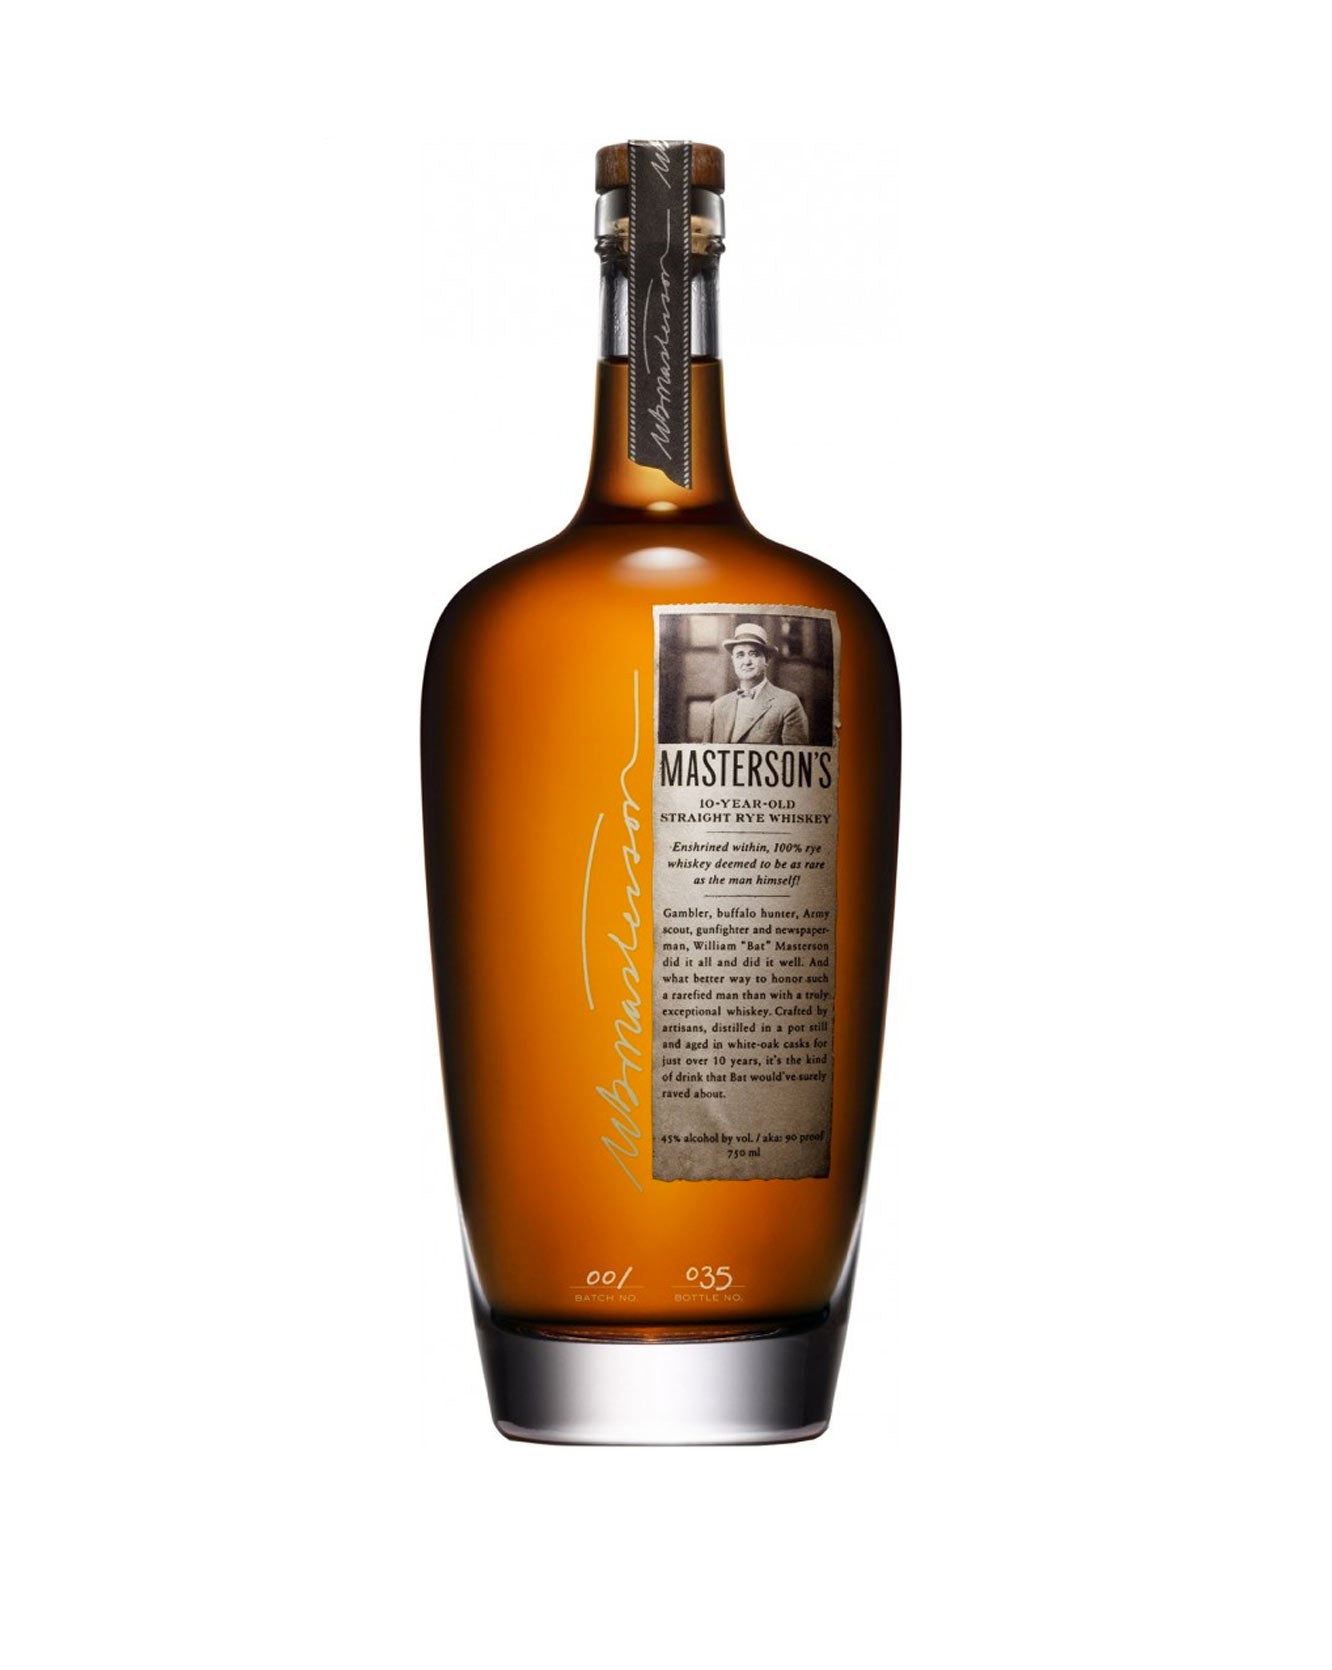 Masterson's 10 Year Old Rye